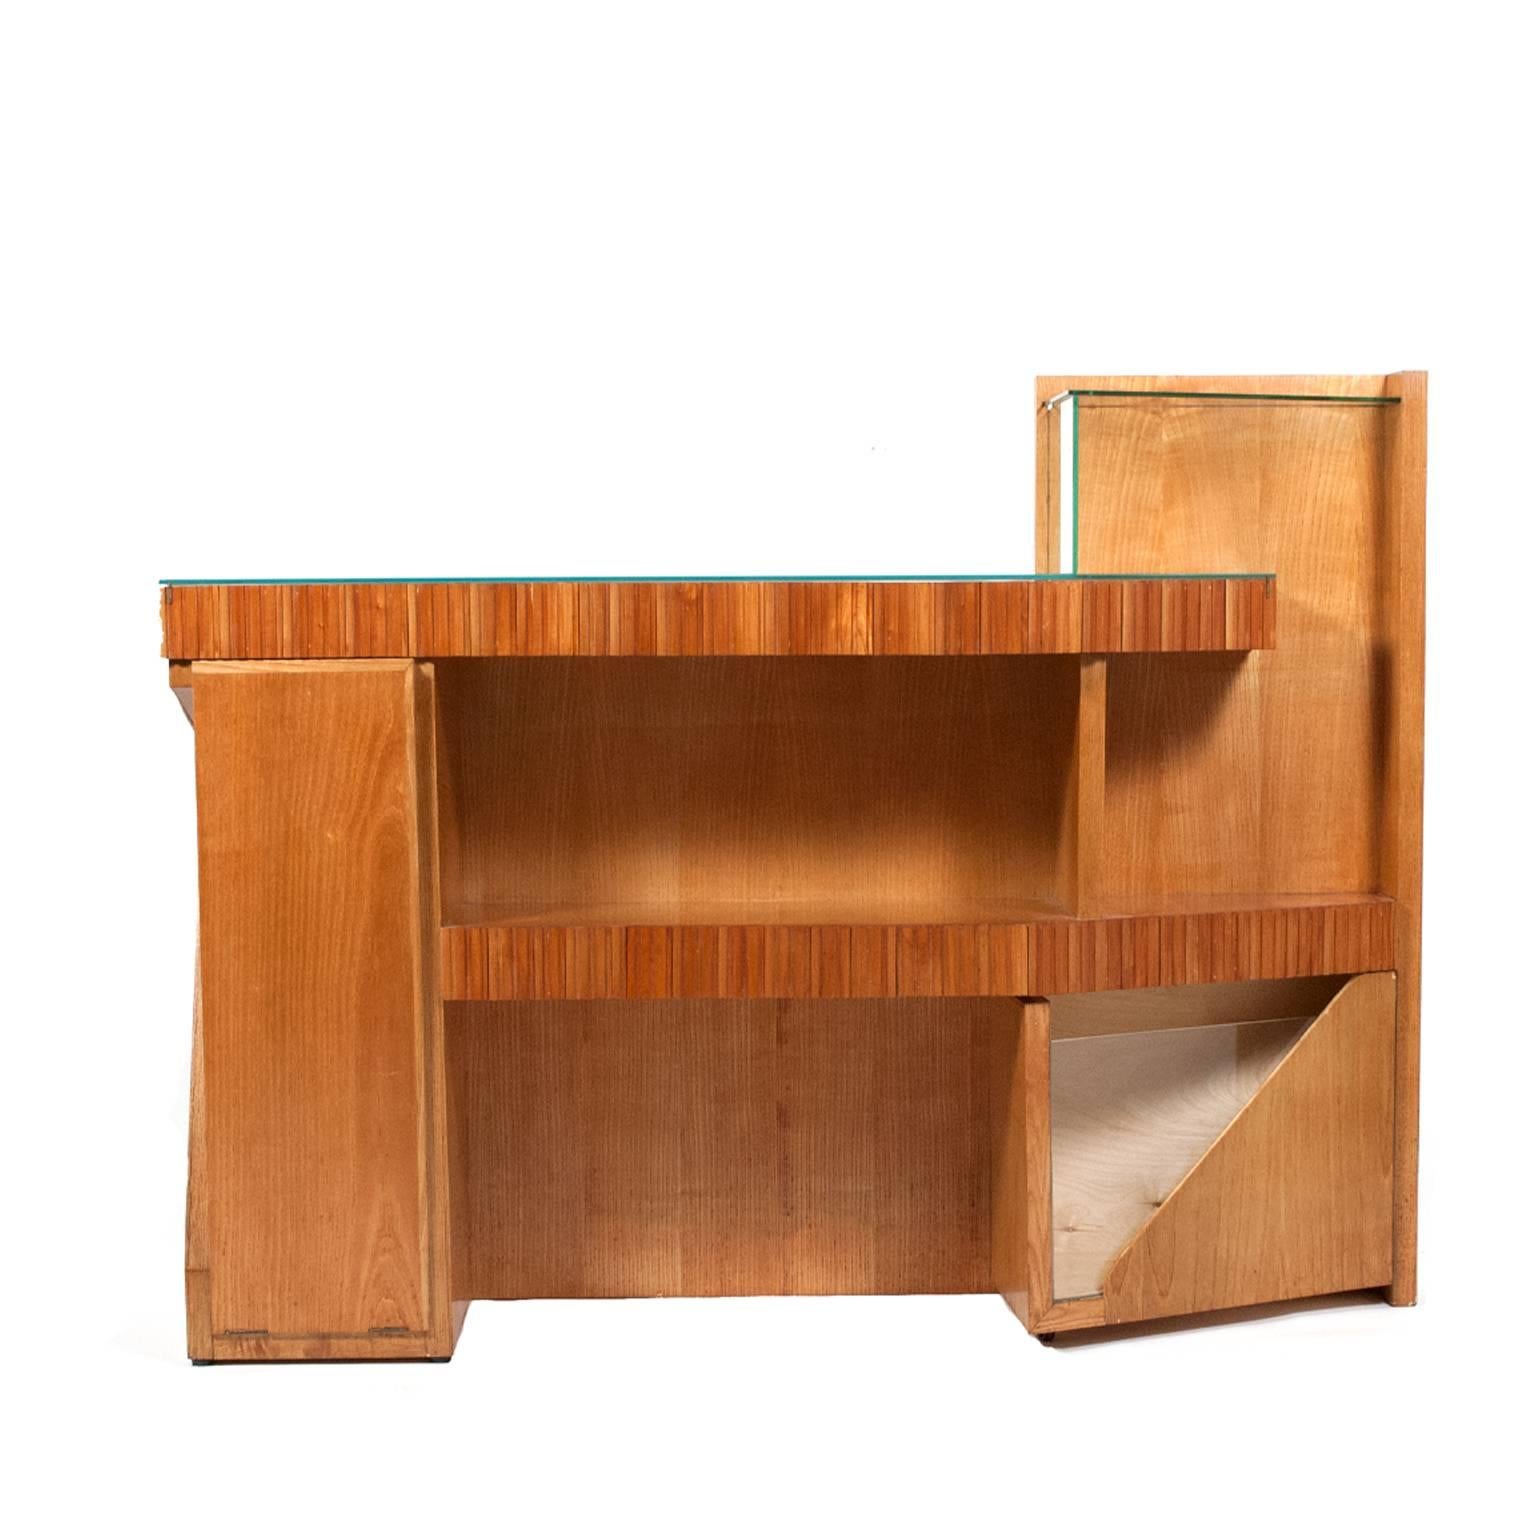 Beautiful design, ashwood, glass, walnut entertainment cabinet with multiple storage capabilities. Made in Italy.